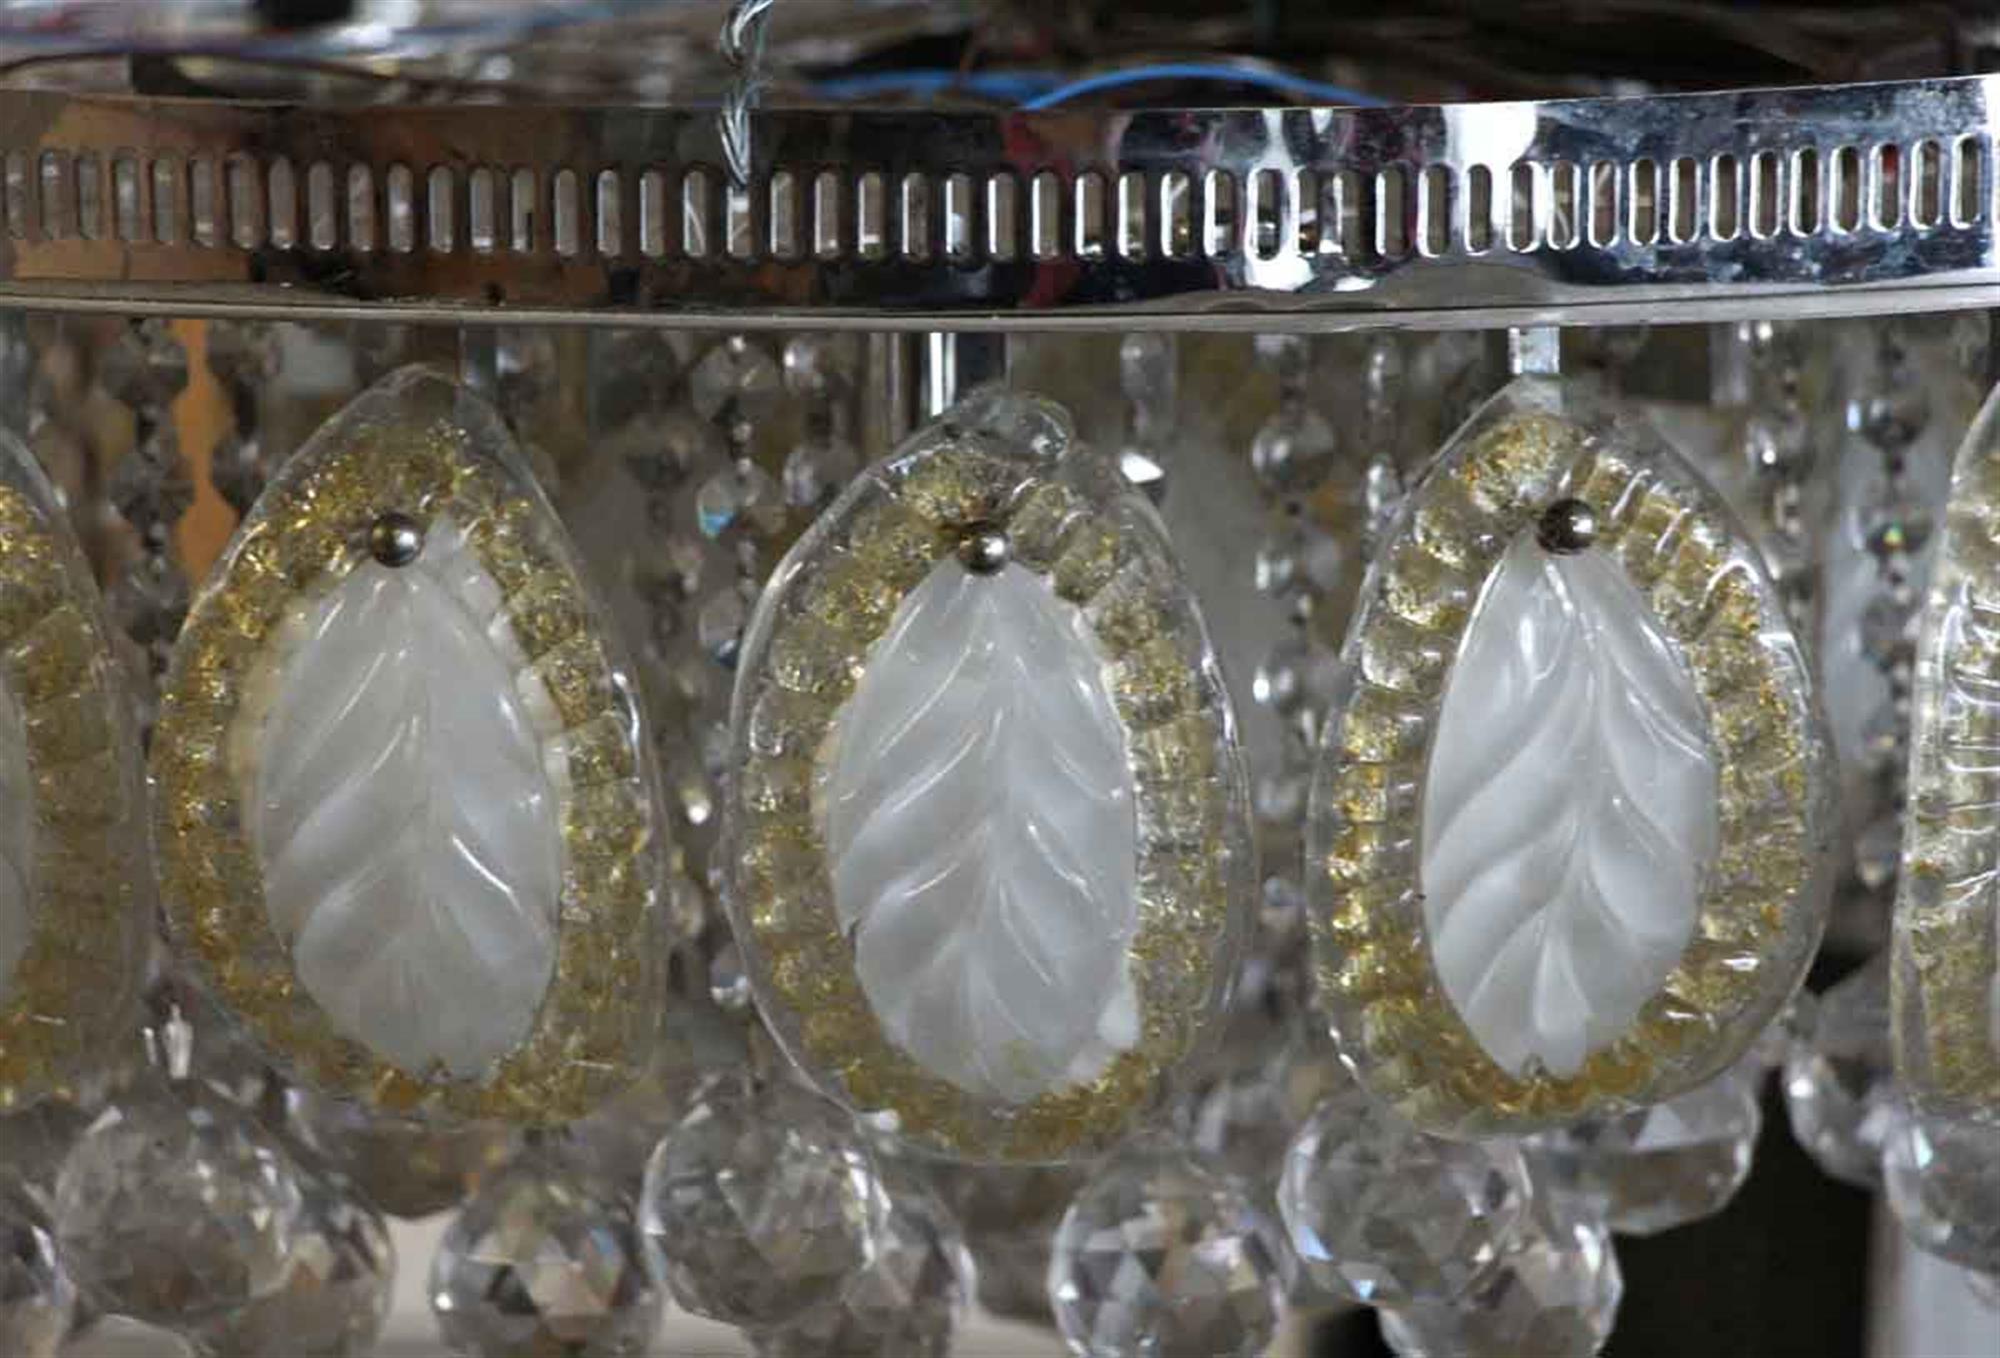 1960s oversized flush mount ballroom light with glass leaves and faceted crystals. Matching sconces available. Several available at time of posting. Please inquire. Priced each. This can be seen at our 400 Gilligan St location in Scranton, PA.